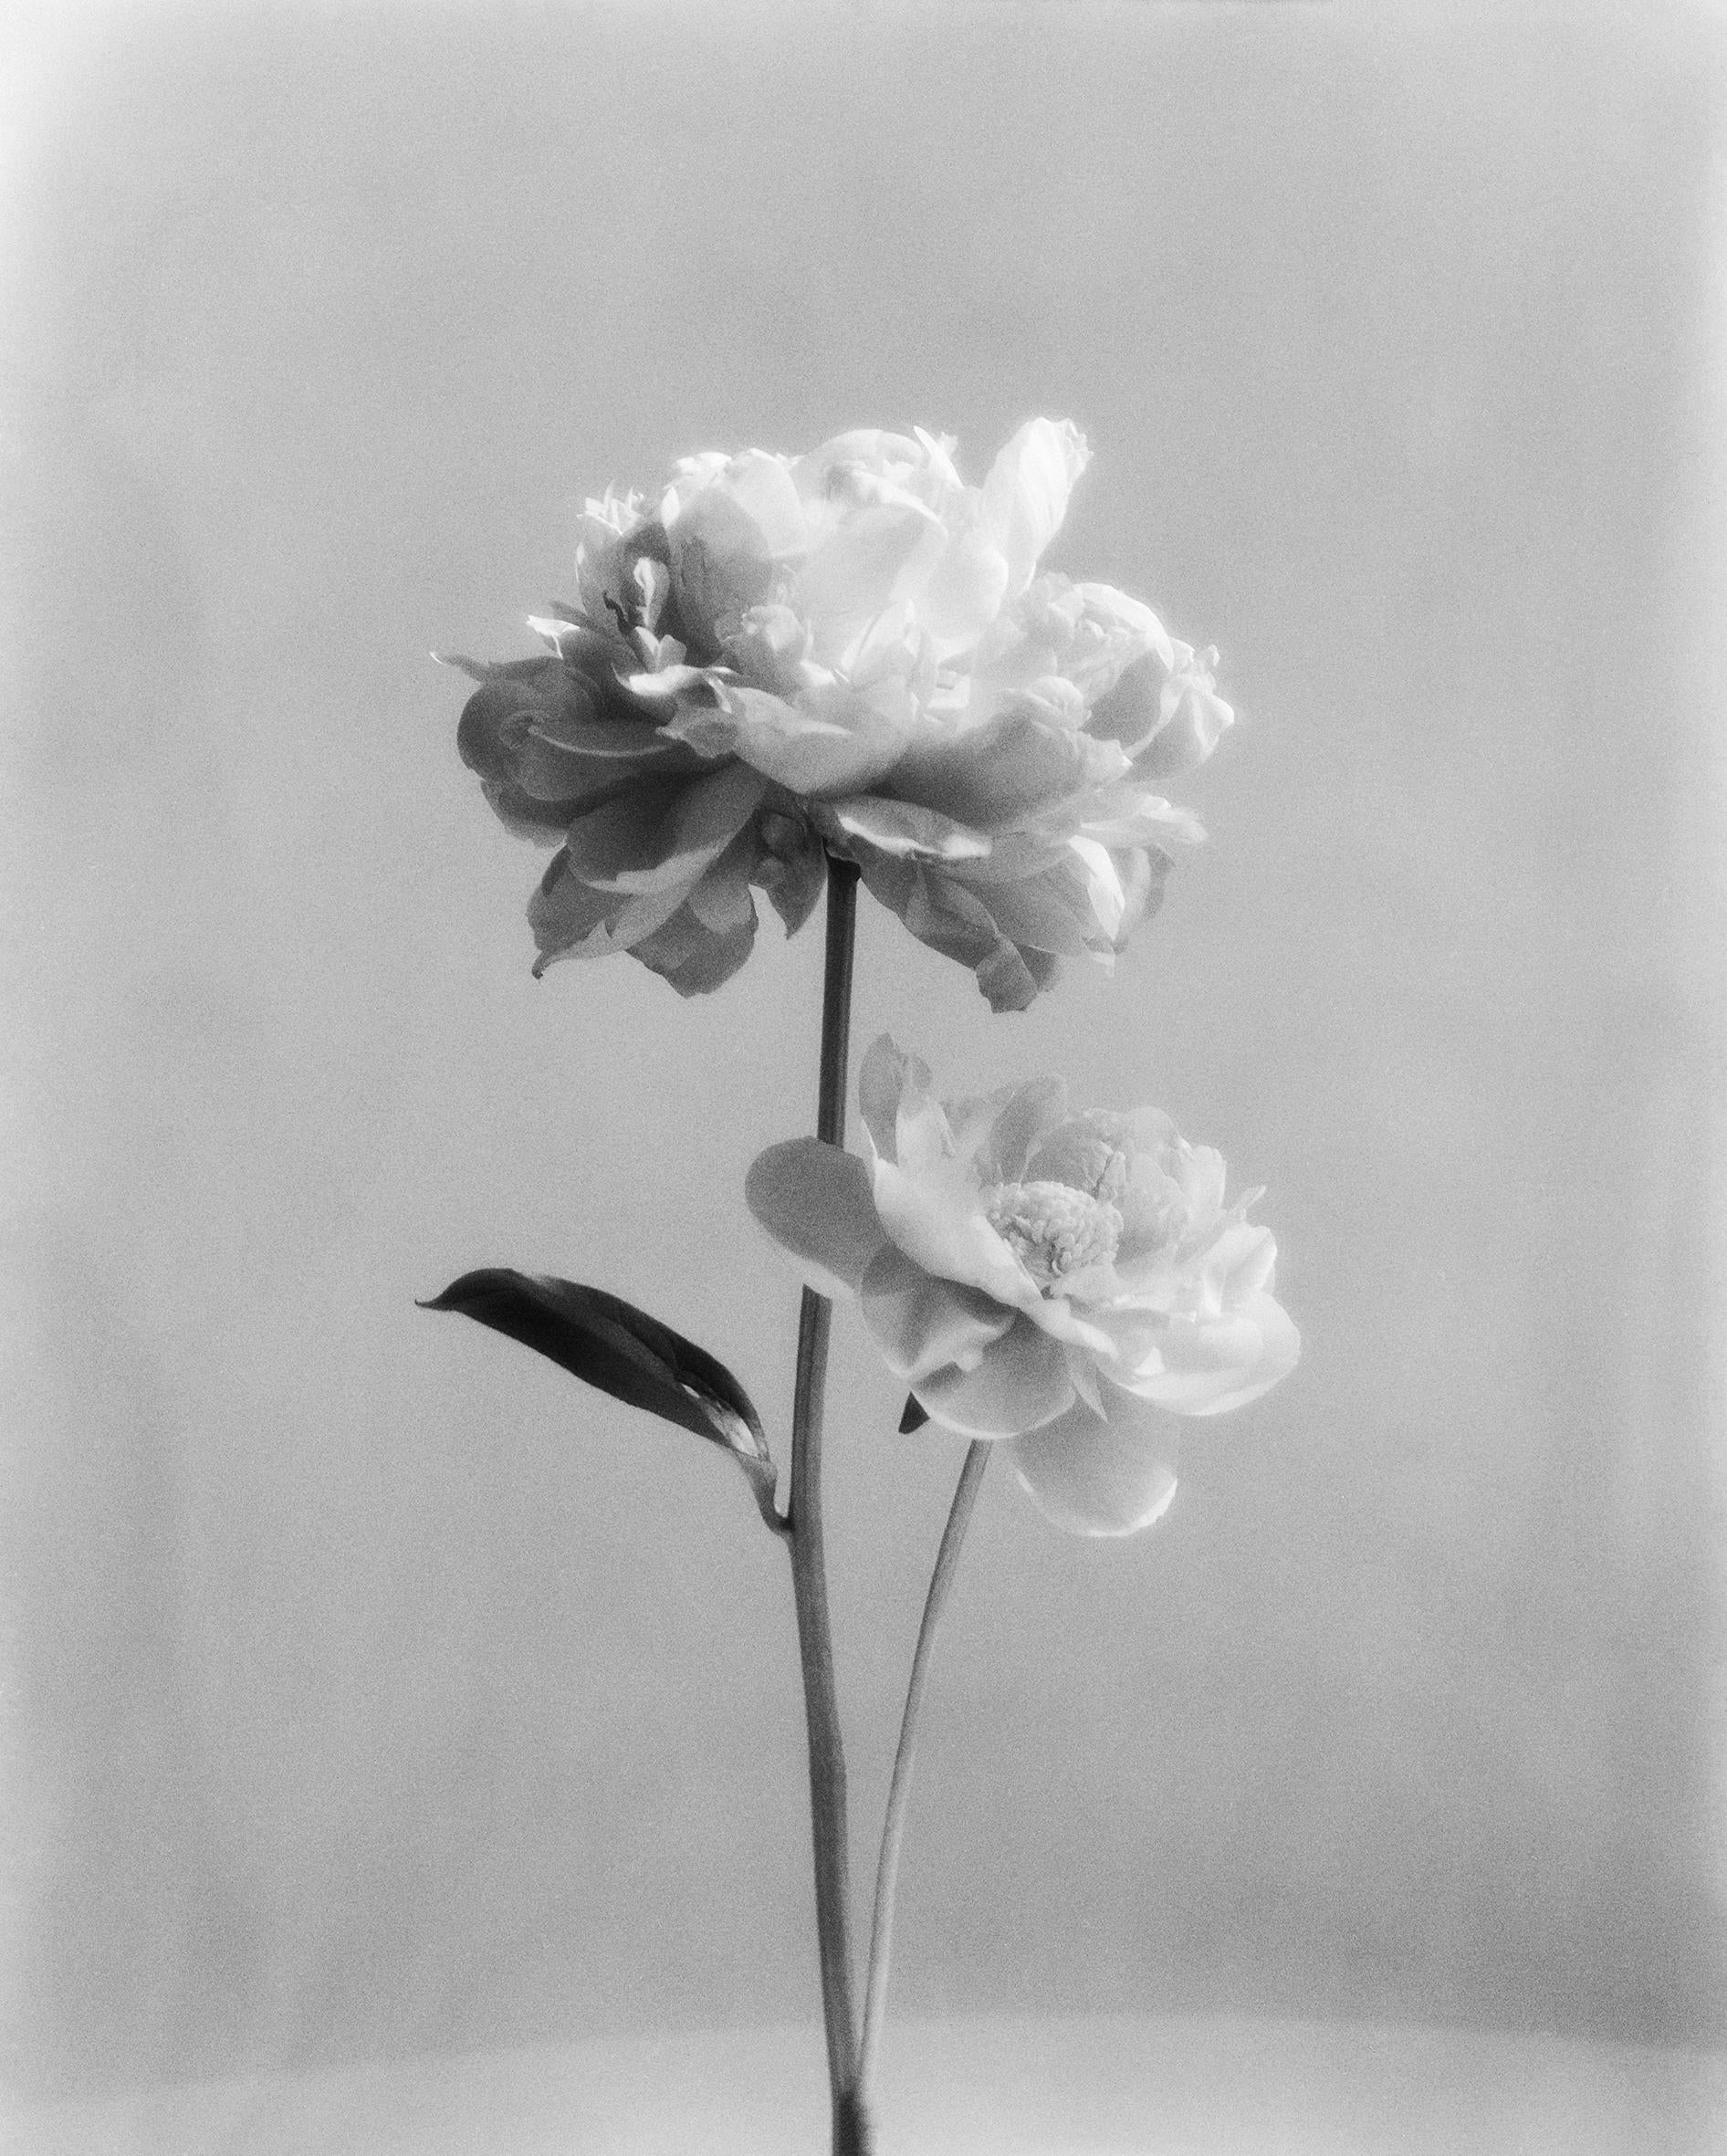 Ugne Pouwell Black and White Photograph - Peony no.2 - analogue black and white floral photography, limited edition 15